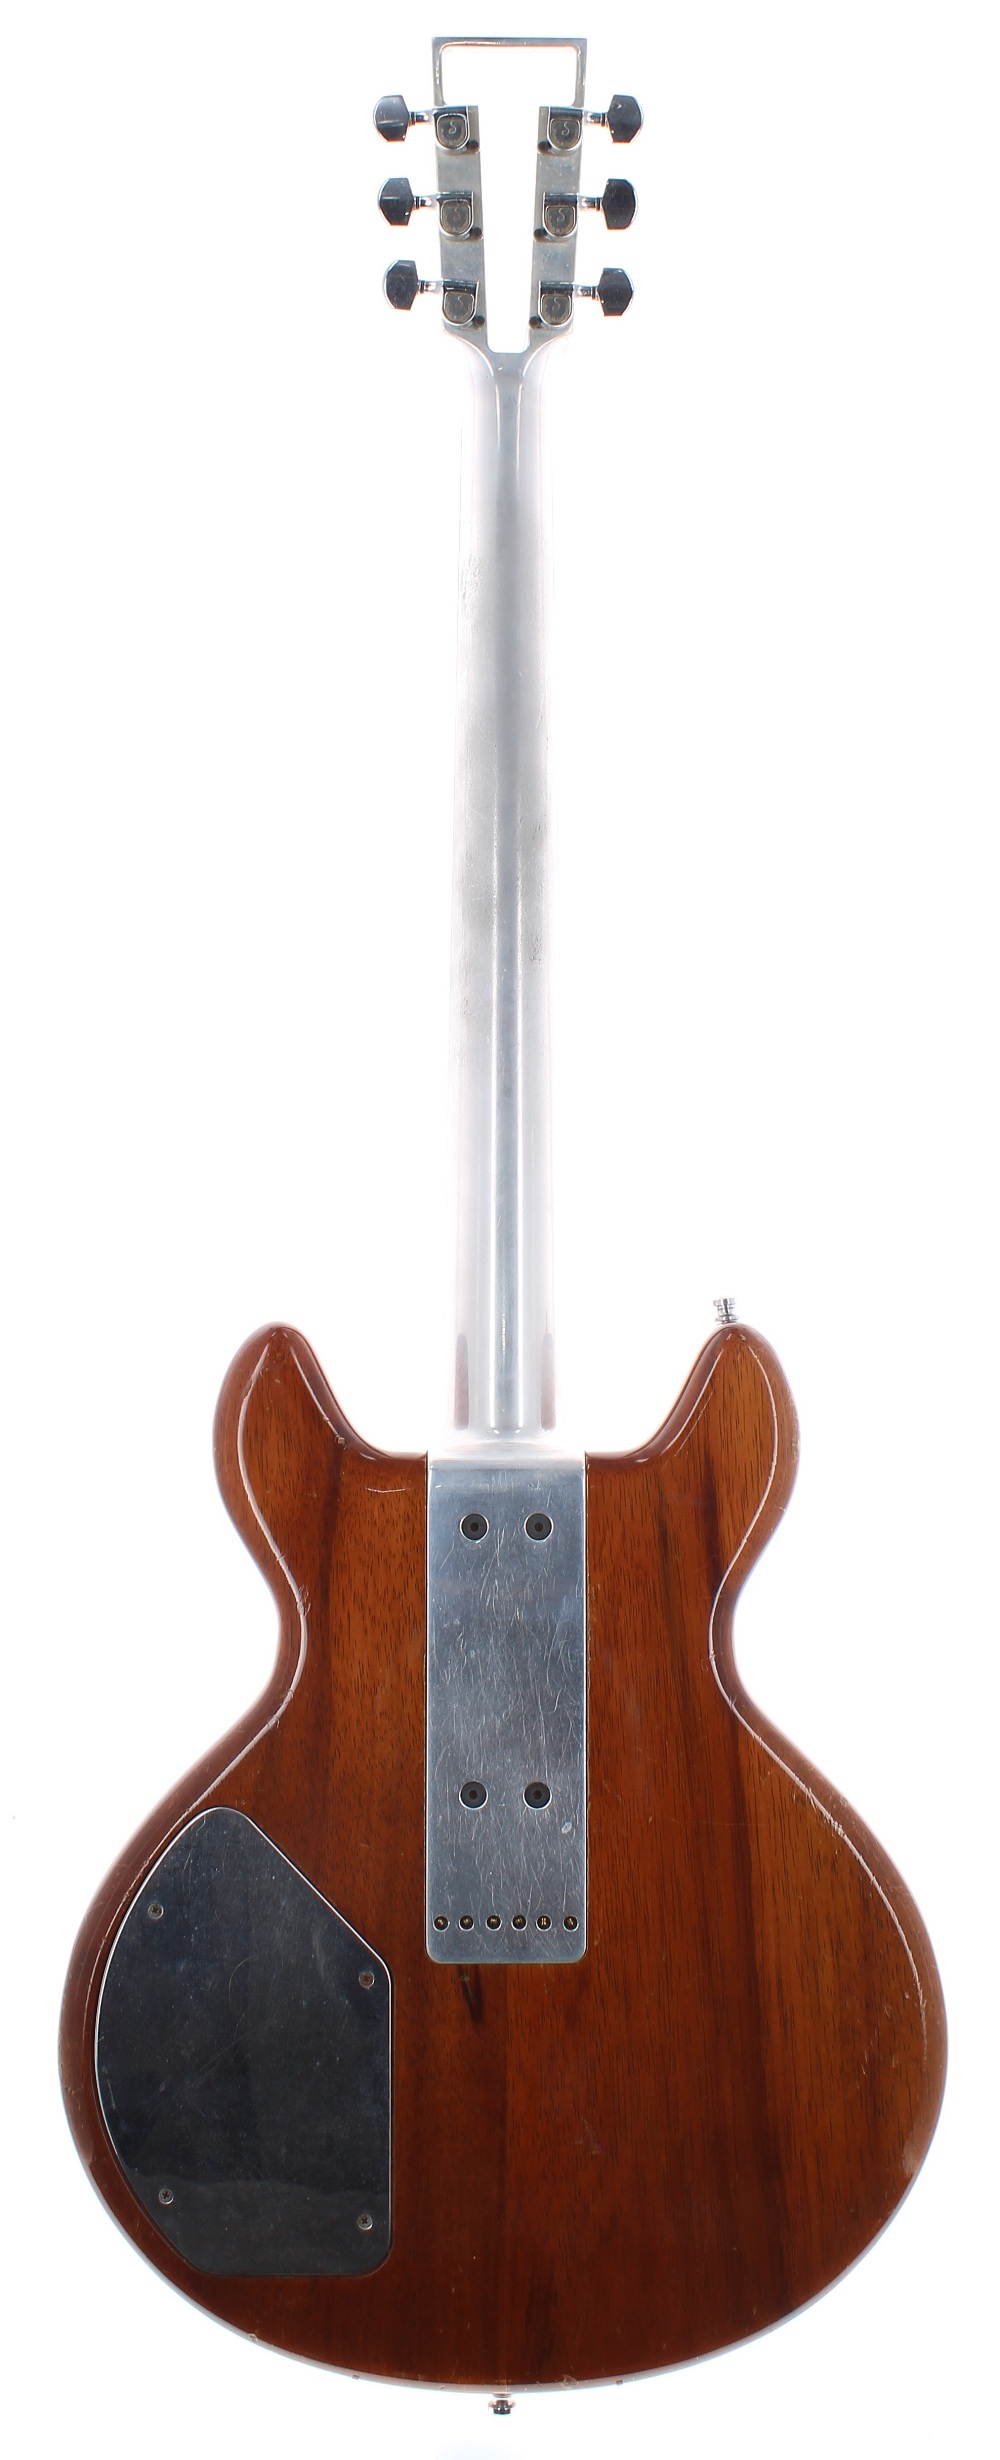 1975 Travis Bean TB1000S electric guitar, made in USA, ser. no. 5x5; Finish: natural koa, lacquer - Image 2 of 10